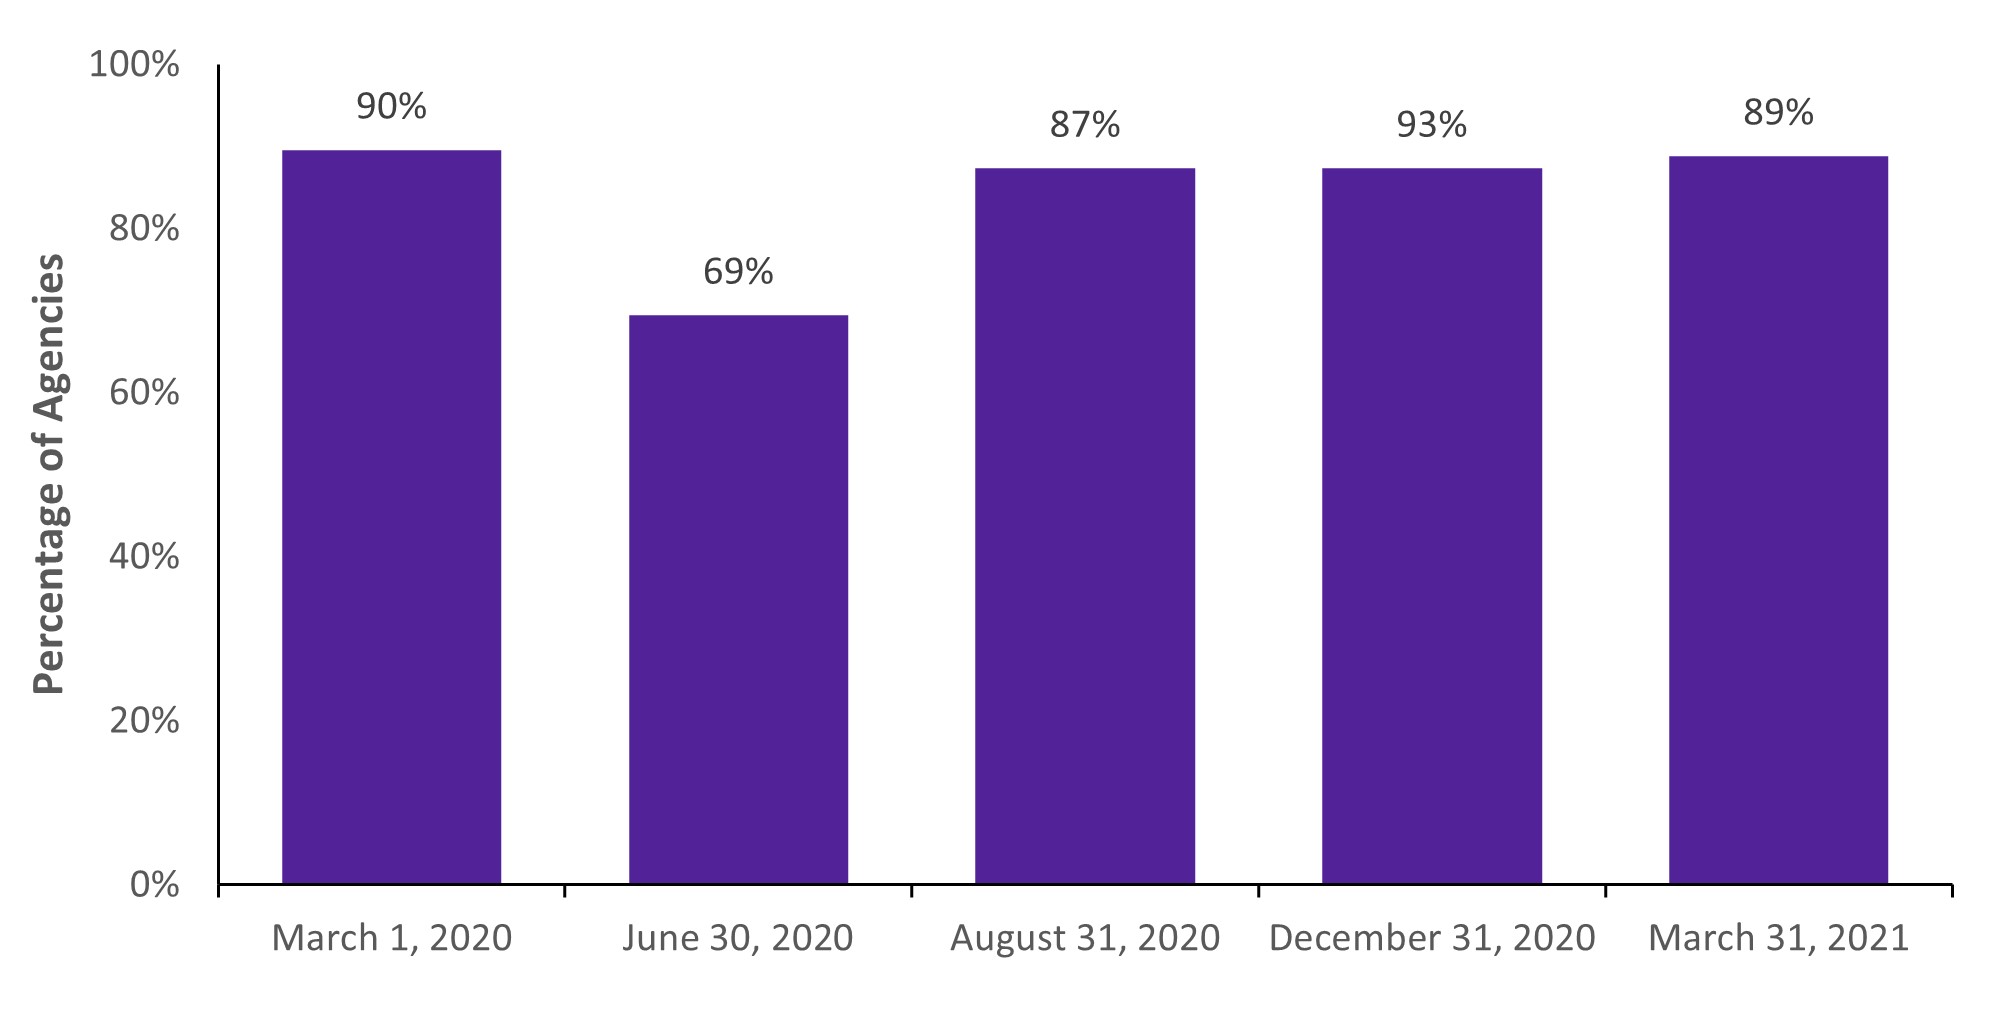 Percentage of home child care agencies providing care in 2020-2021